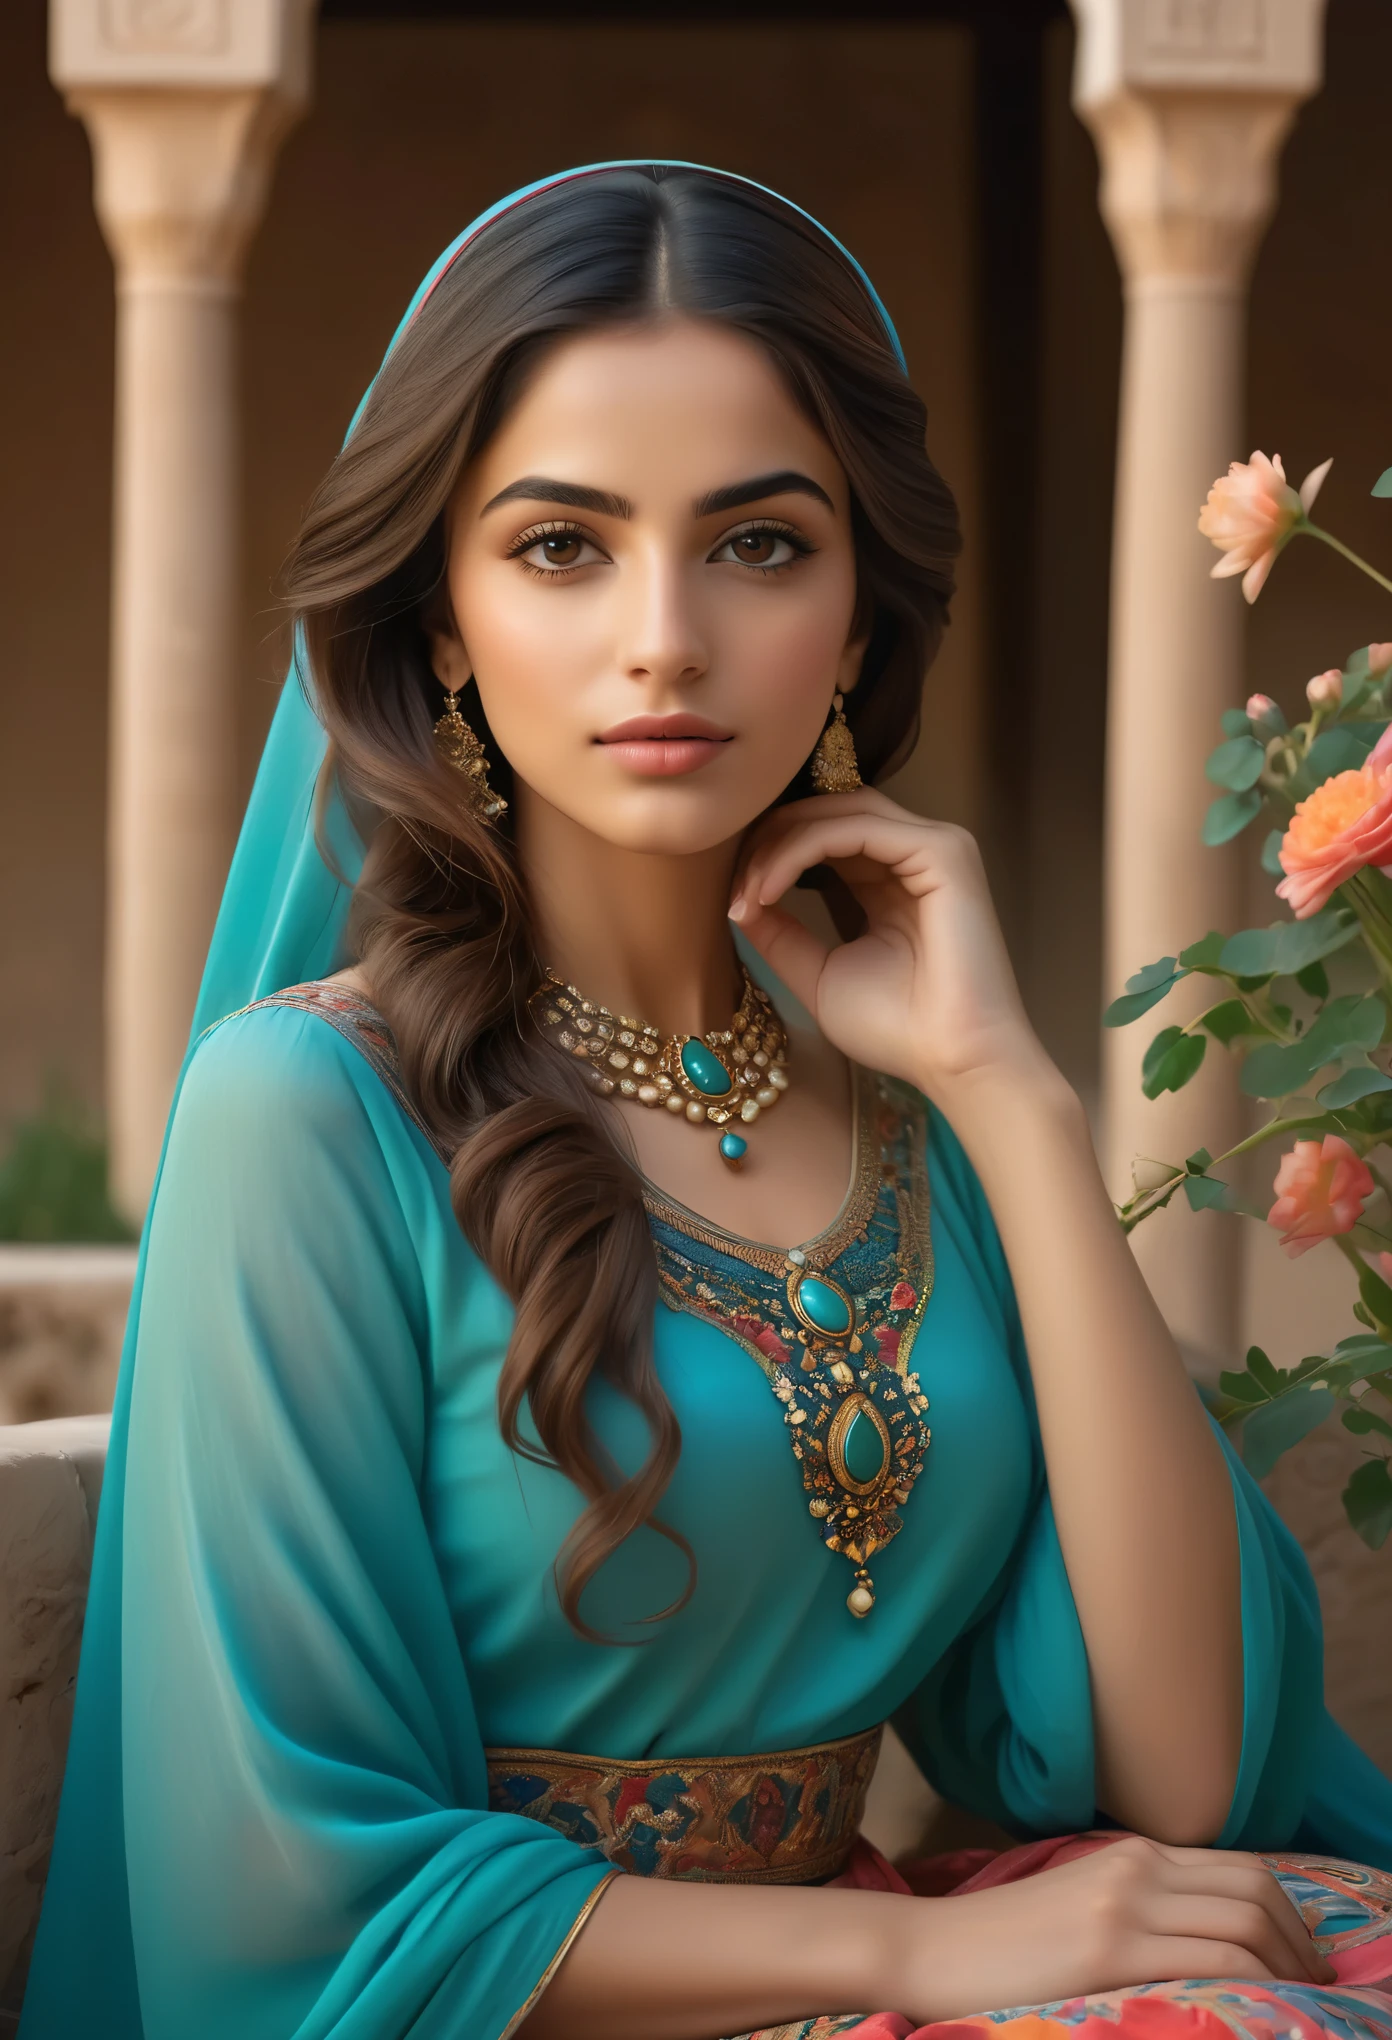 (best quality,4k,8k,highres,masterpiece:1.2),ultra-detailed,(realistic,photorealistic,photo-realistic:1.37),19th century,portraits,color palette: warm tones,soft lighting,saudi arabia,teenager,beautiful girl,detailed eyes,detailed lips,long eyelashes,rosy cheeks,flowing dark hair,graceful posture,turquoise blue hijab,delicate jewelry,serene expression,mood: tranquil,background: garden with vibrant flowers and a stone bench,traditional dress,constellation necklace,vivid colors,subtle brushstrokes,Persian-influenced pattern,subtle lighting and shadows,traditional Arabic calligraphy,tenderly painted hands.